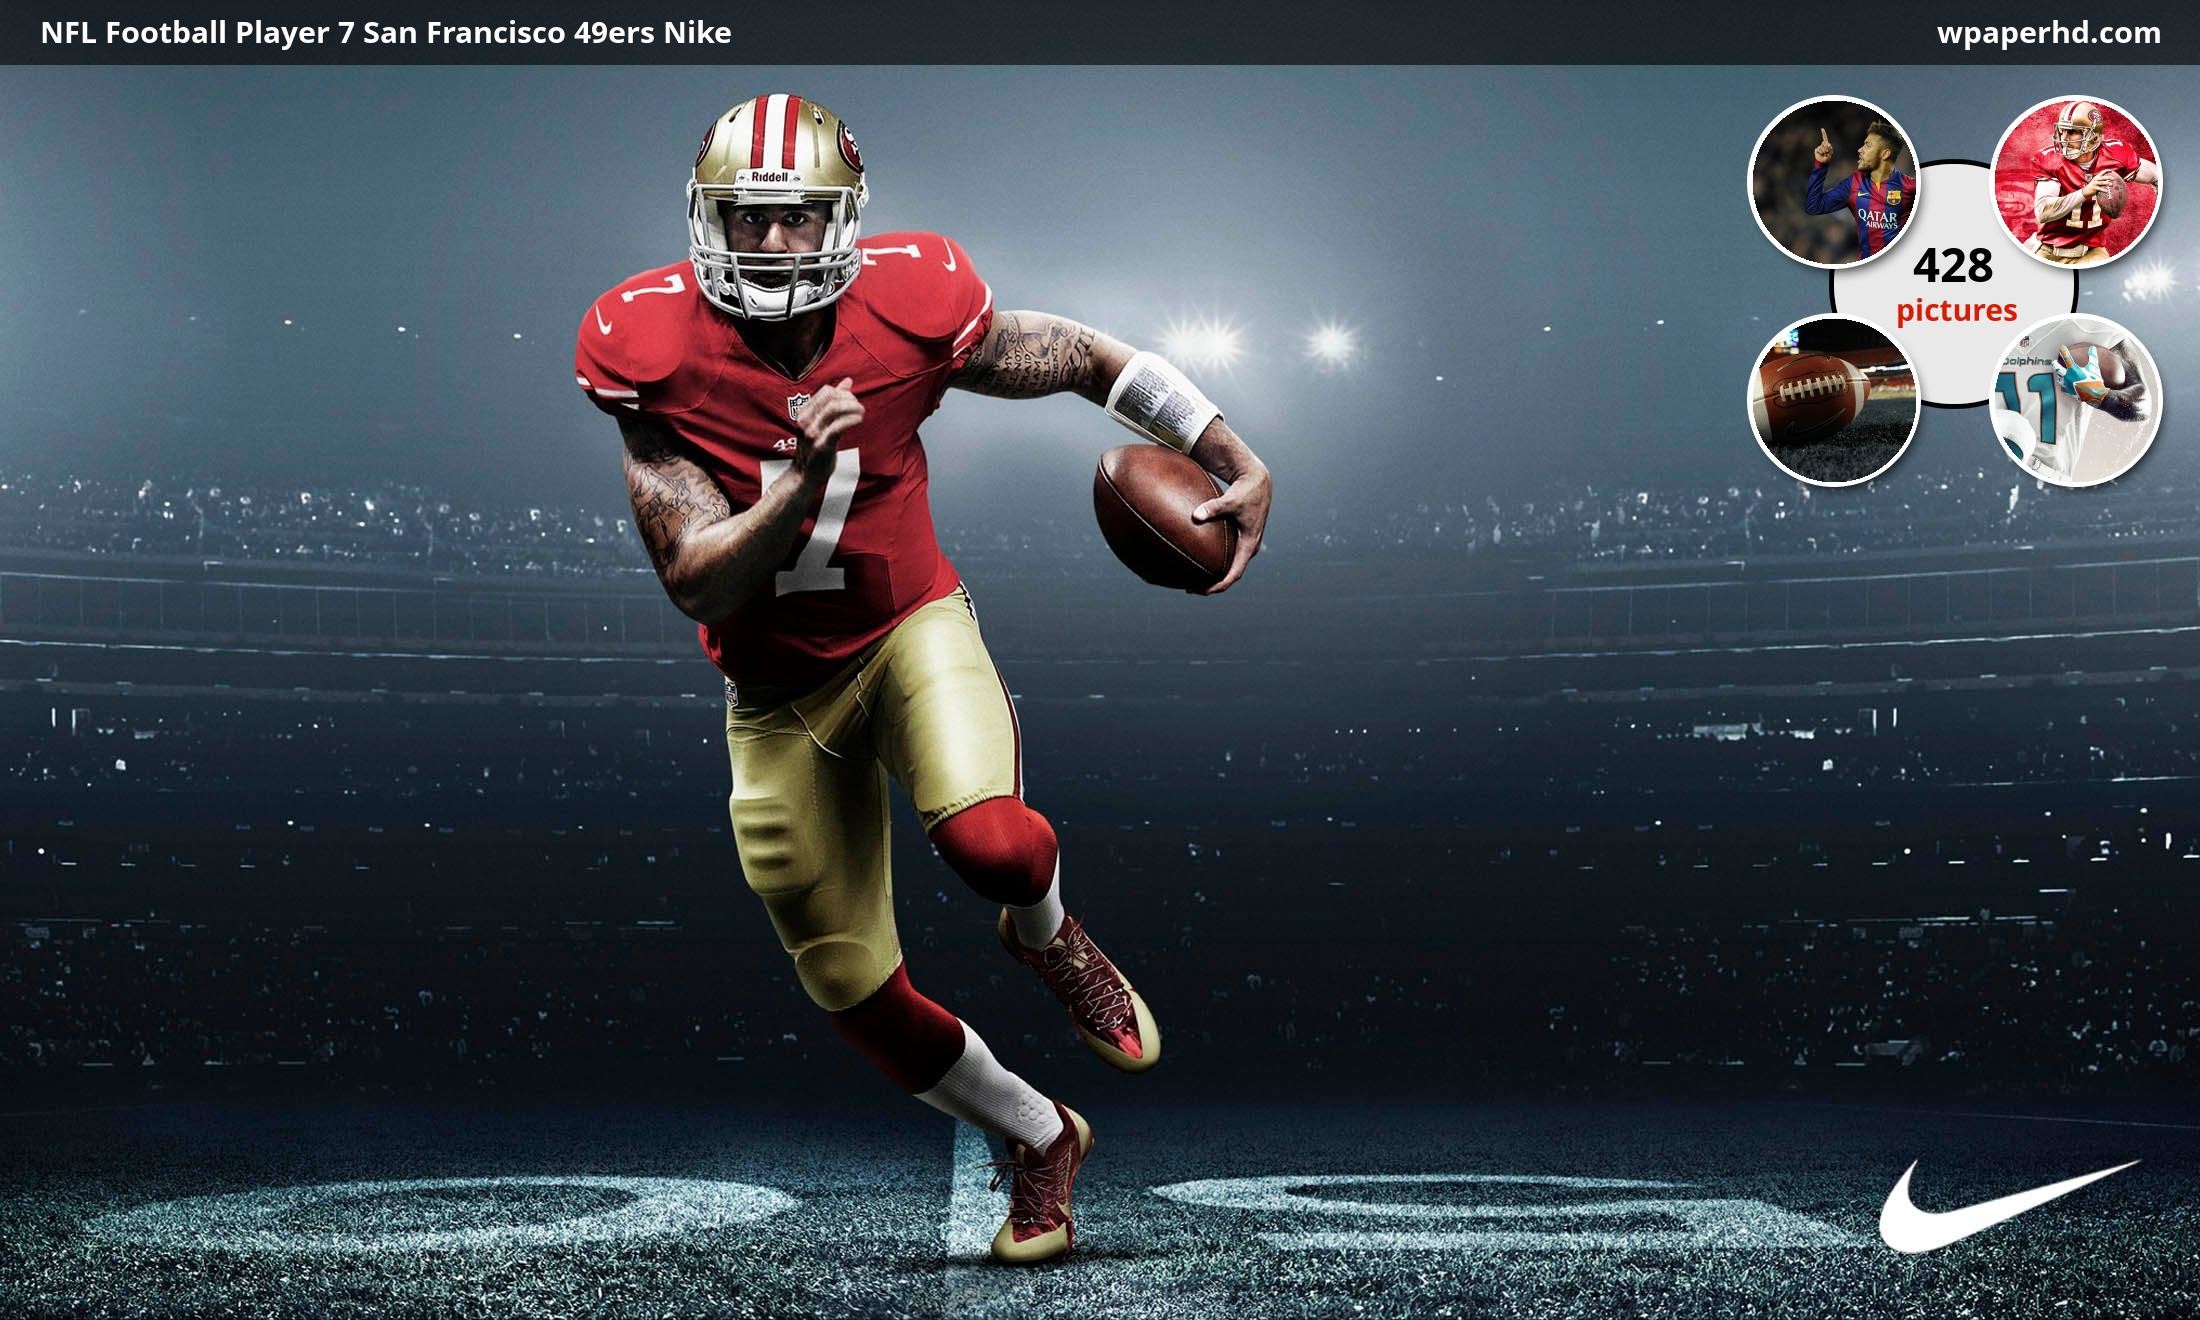 2200x1320 American Football Player Wallpaper (87) Images of Wallpaper Designs Football  American - #SC ...